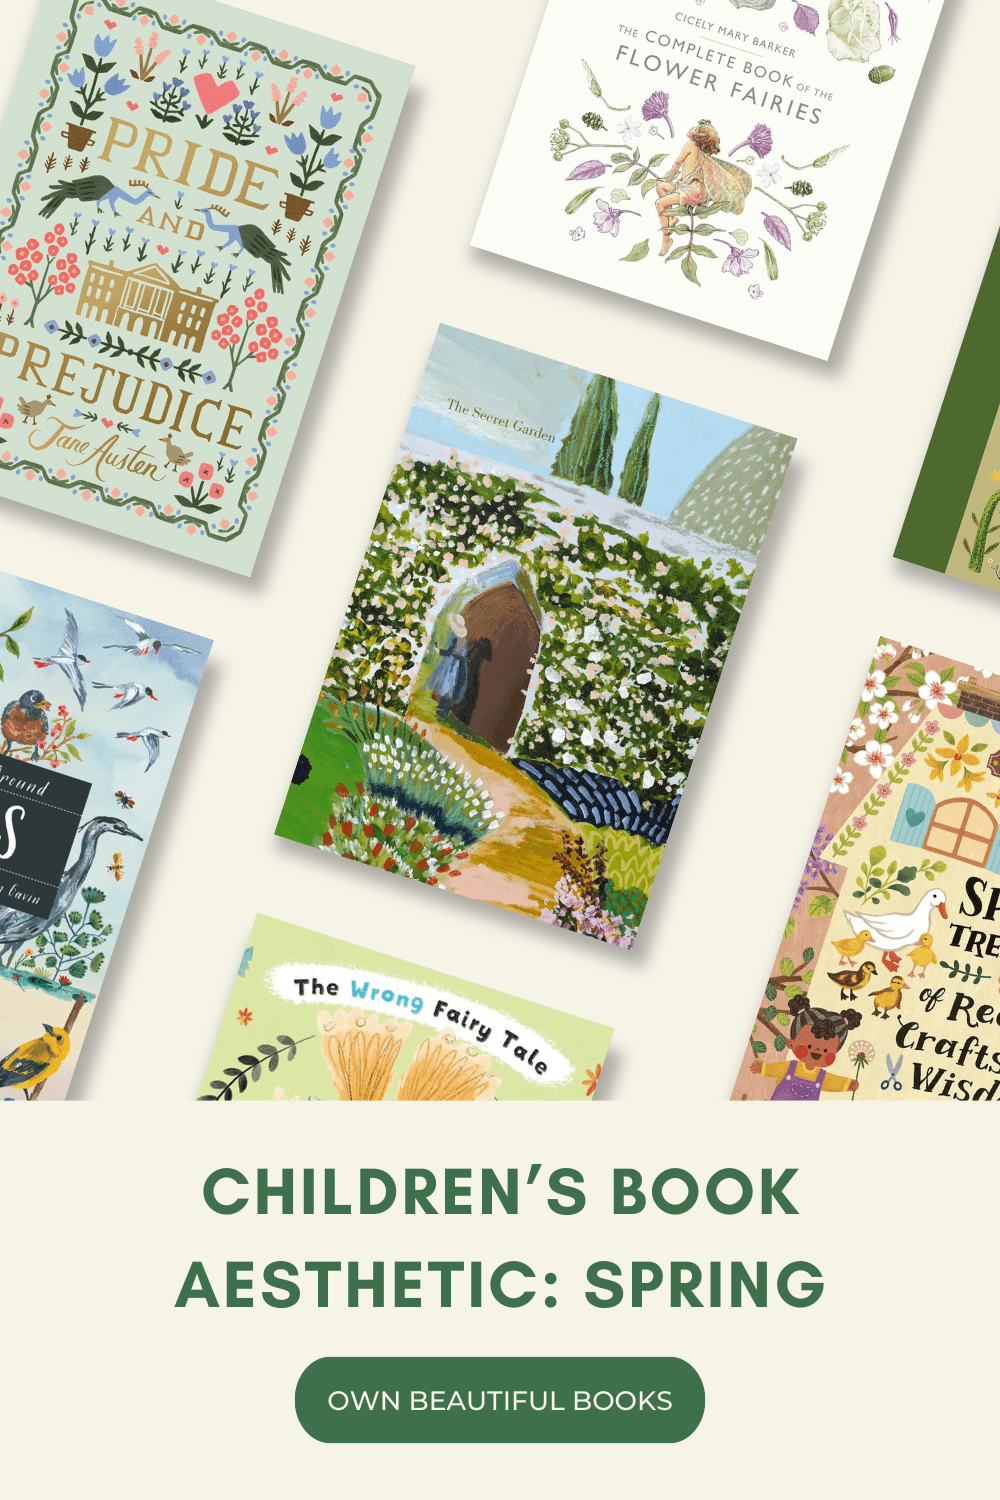 Children's Book Aesthetic: Spring. Own Beautiful Books. Image of book covers from Pride and Prejudice, The Complete Book of Flower Fairies, Secret Garden, Birds, The Wrong Fairy Tale.